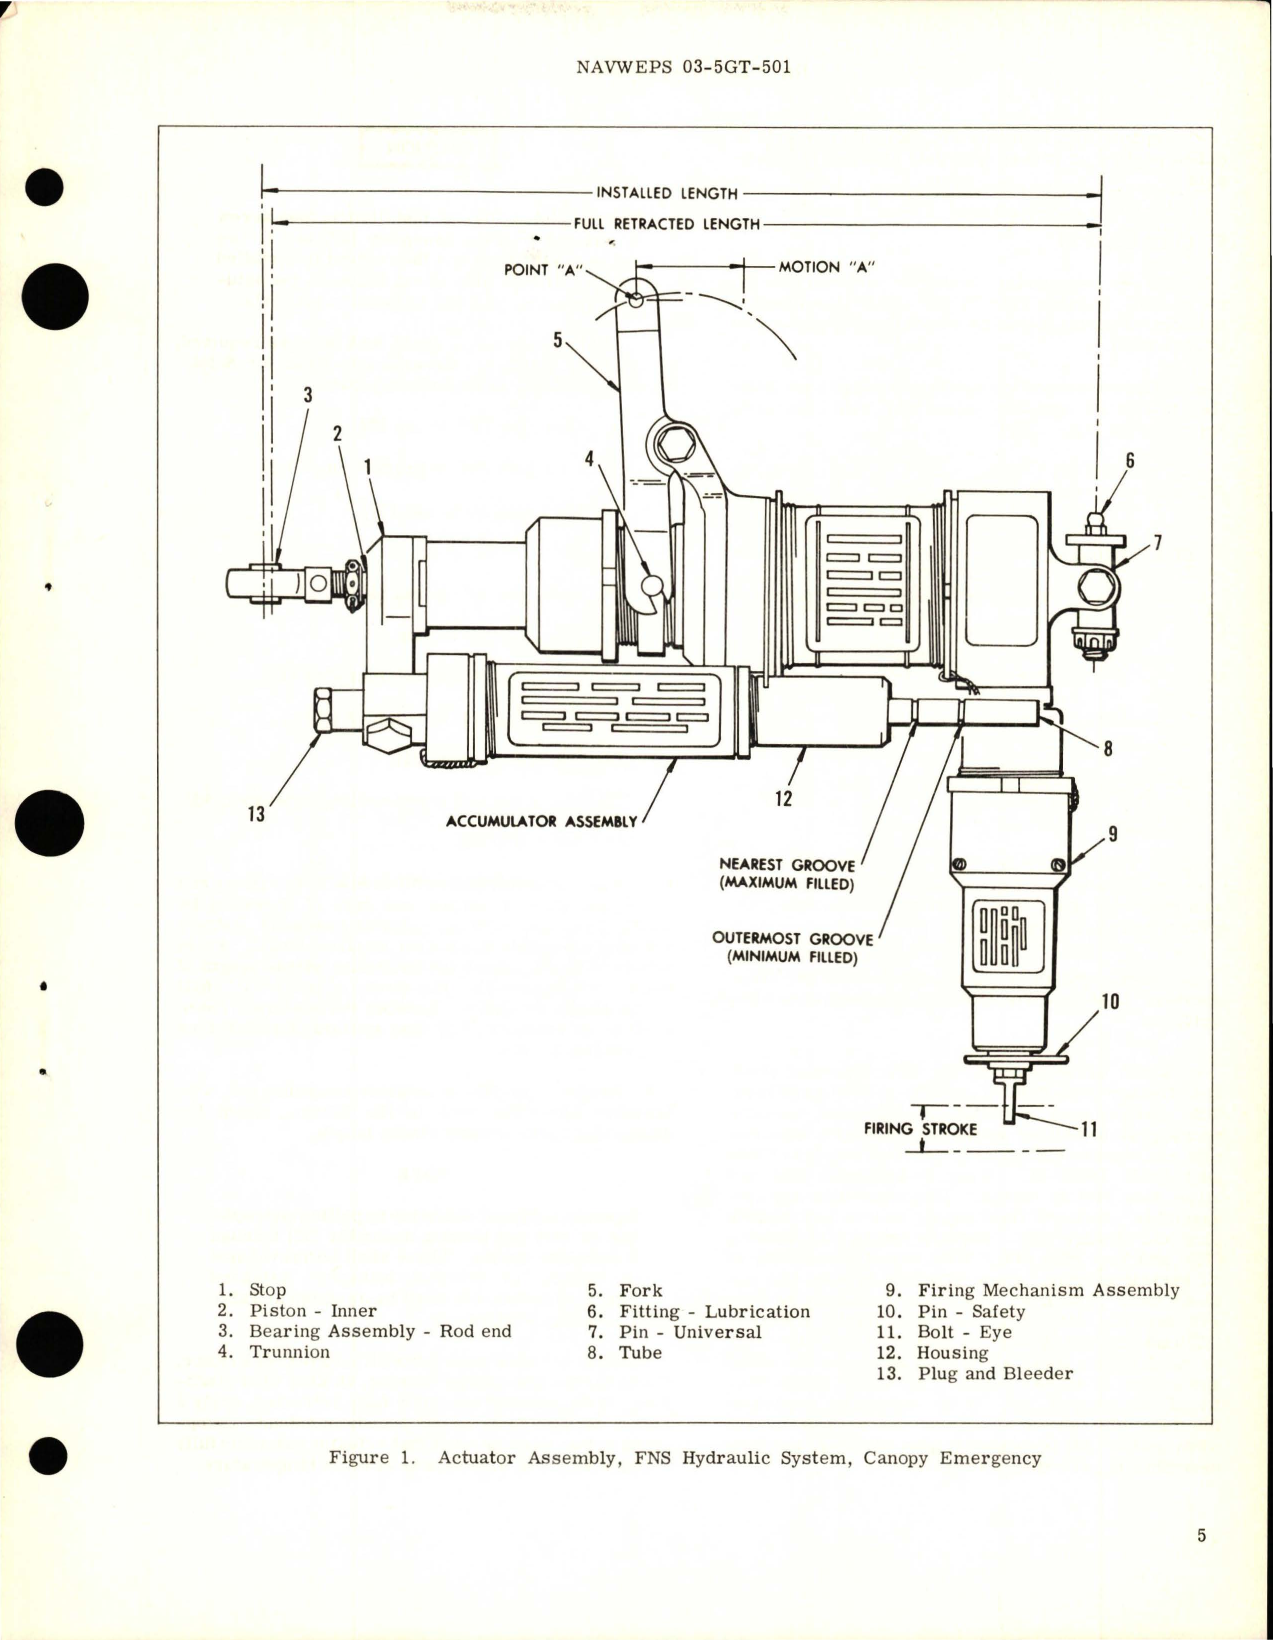 Sample page 7 from AirCorps Library document: Overhaul Instructions with Parts Breakdown for Canopy Emergency Actuator Assembly, FNS Hydraulic System 